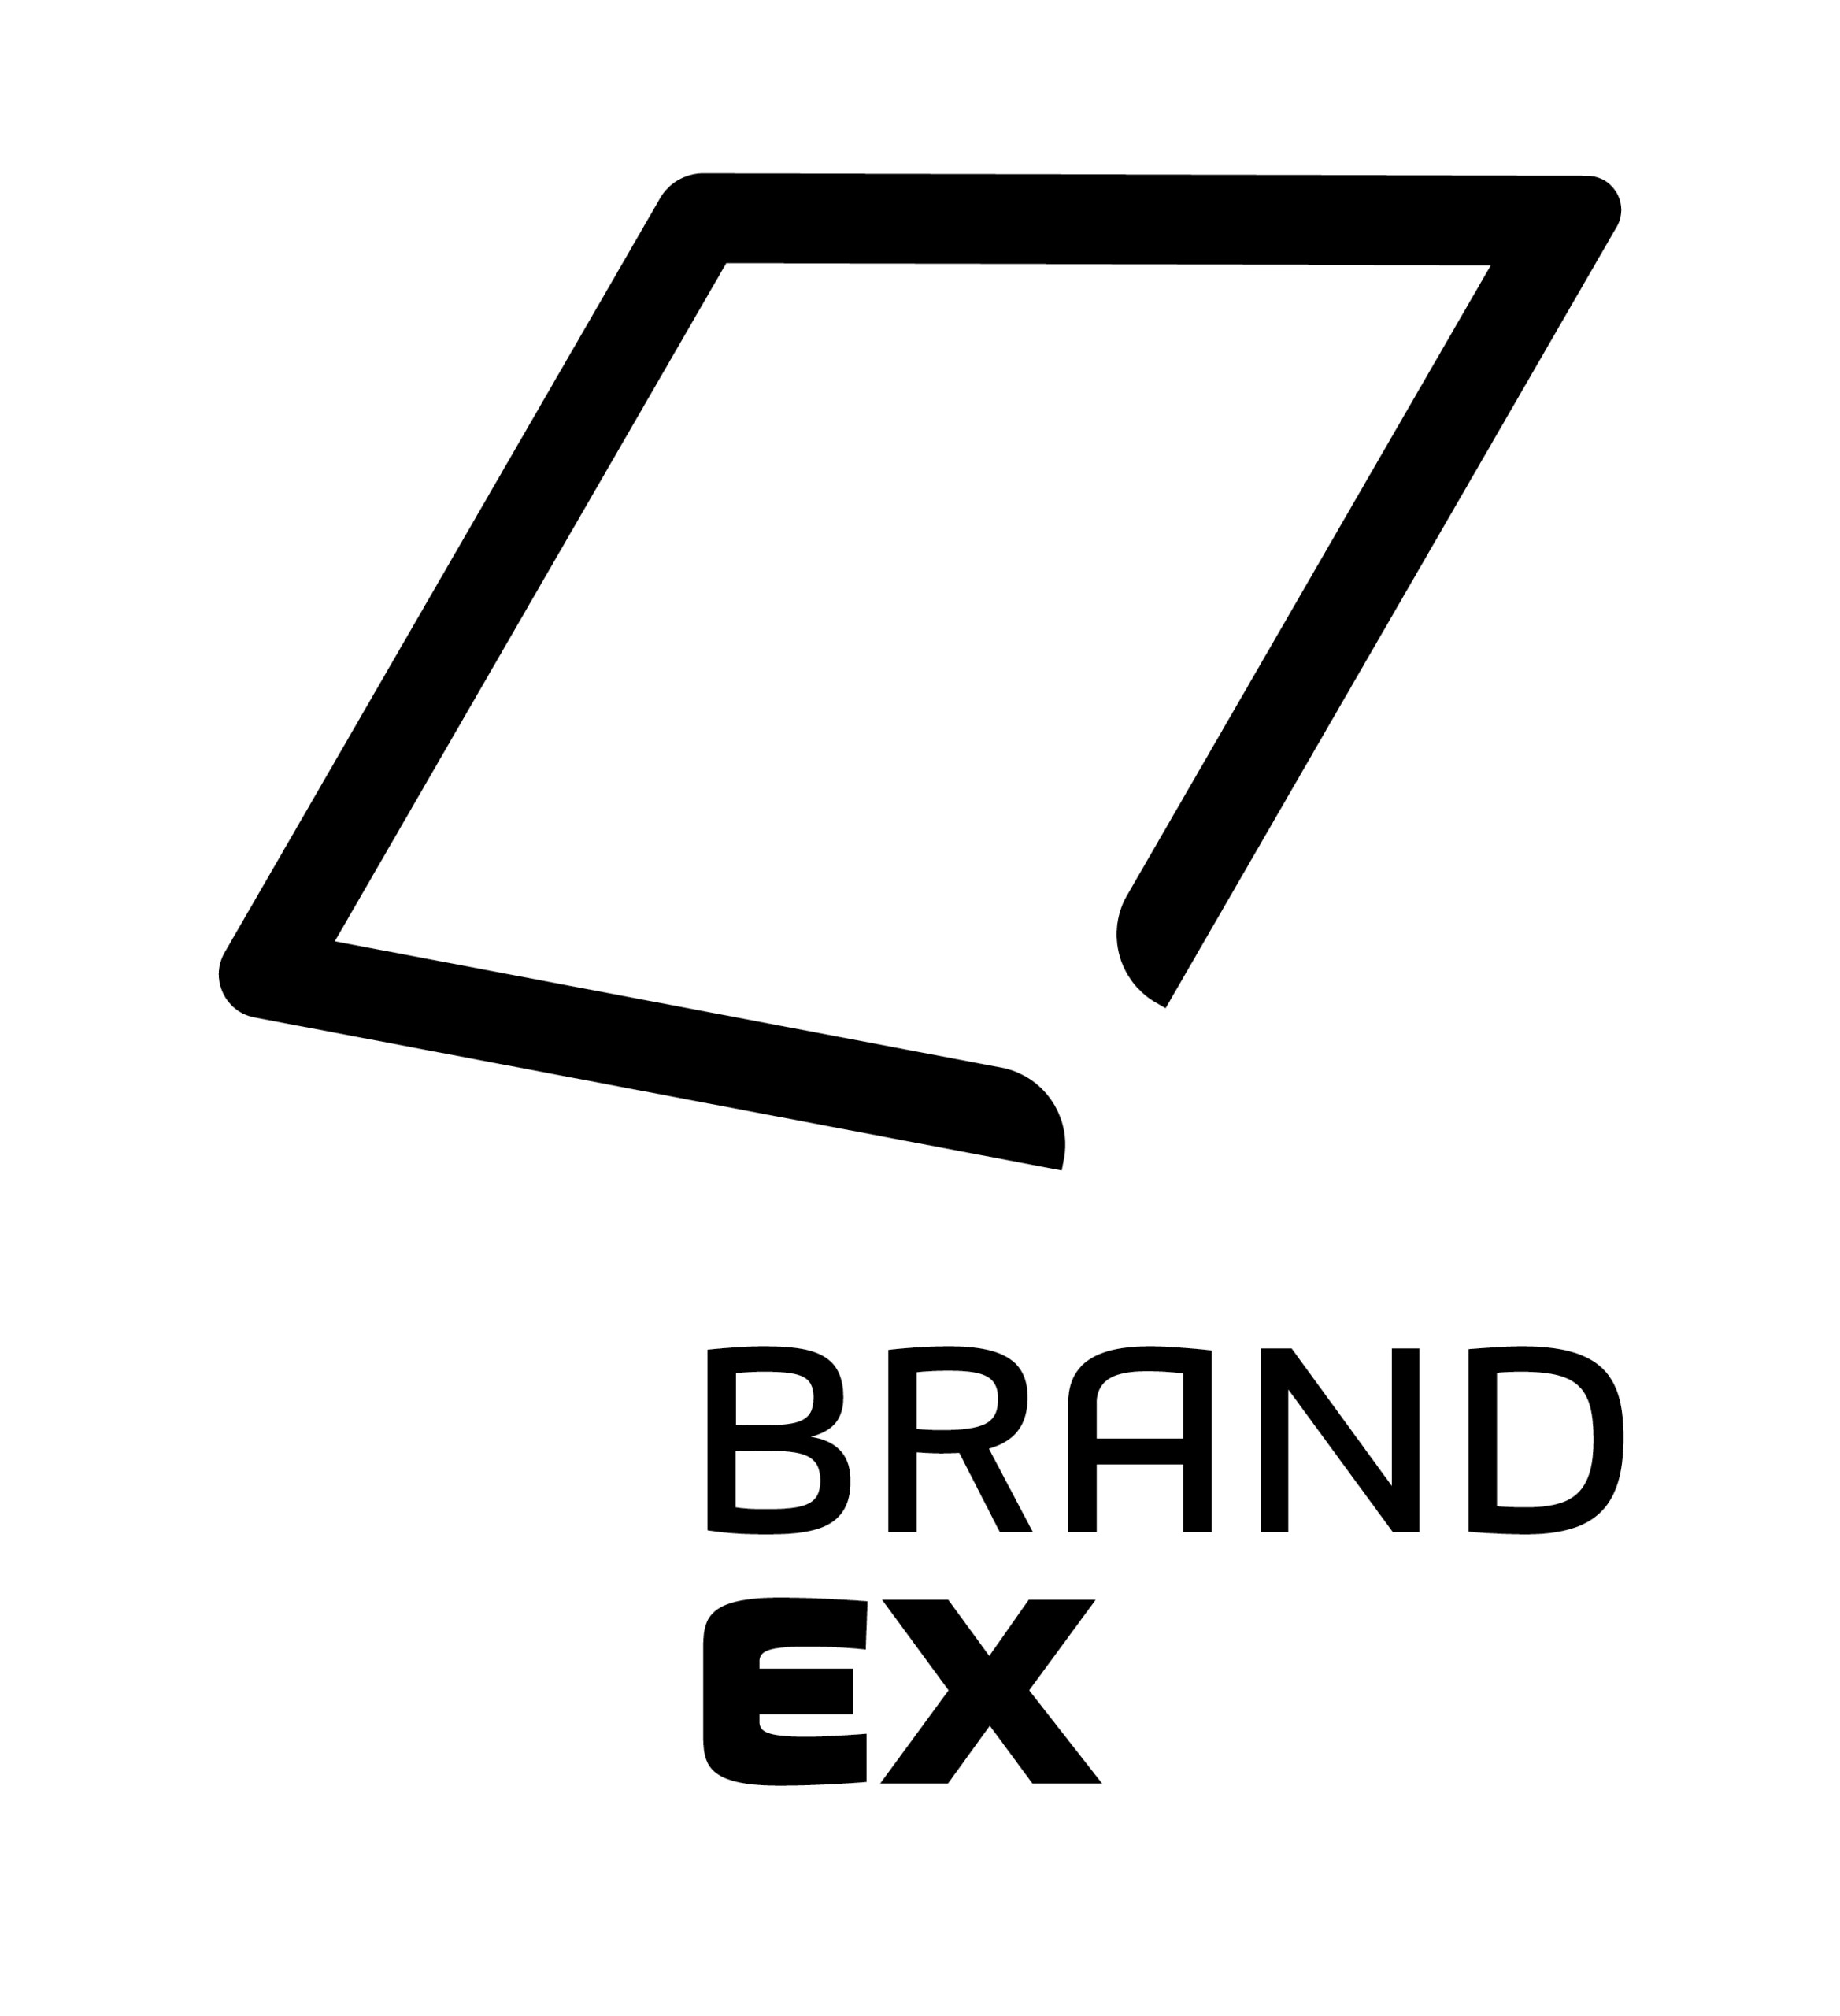 Entry submission deadline for the BrandEx Awards 2021 has been extended